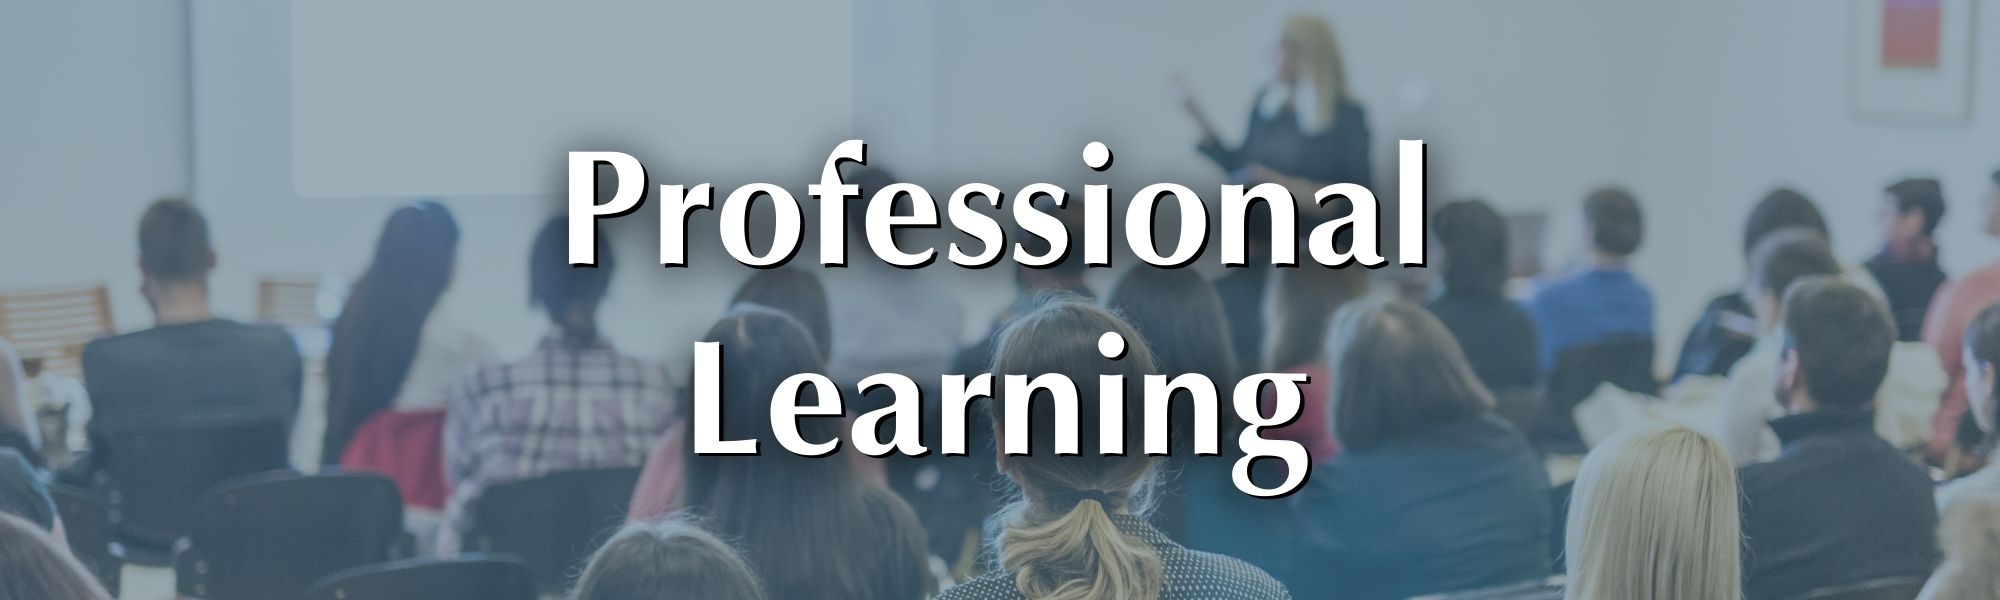 Professional Learning Header